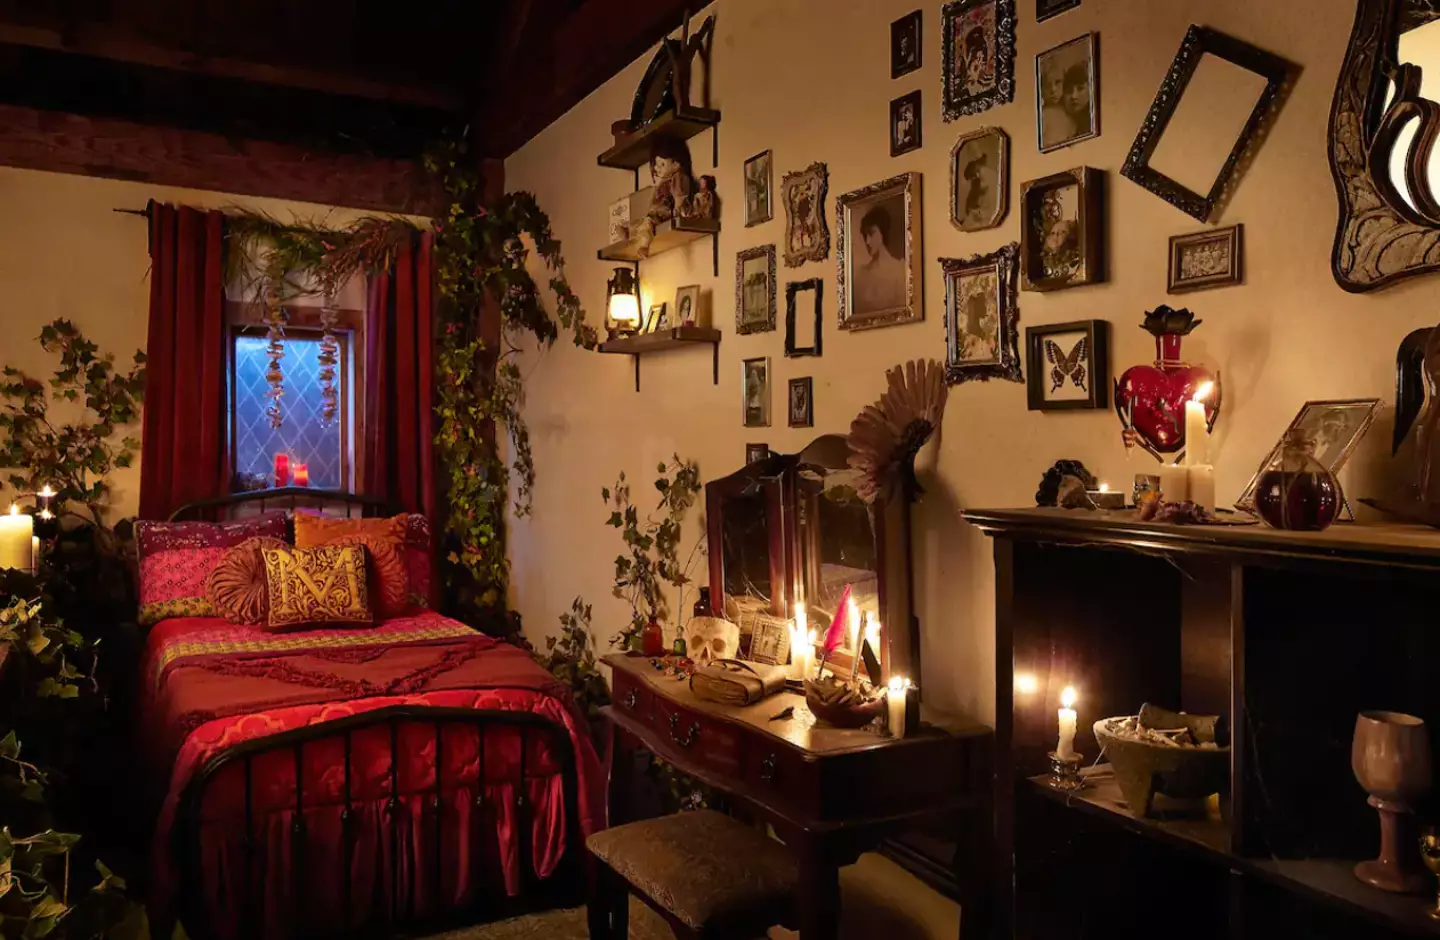 The bedroom is both witchy and comfortable.